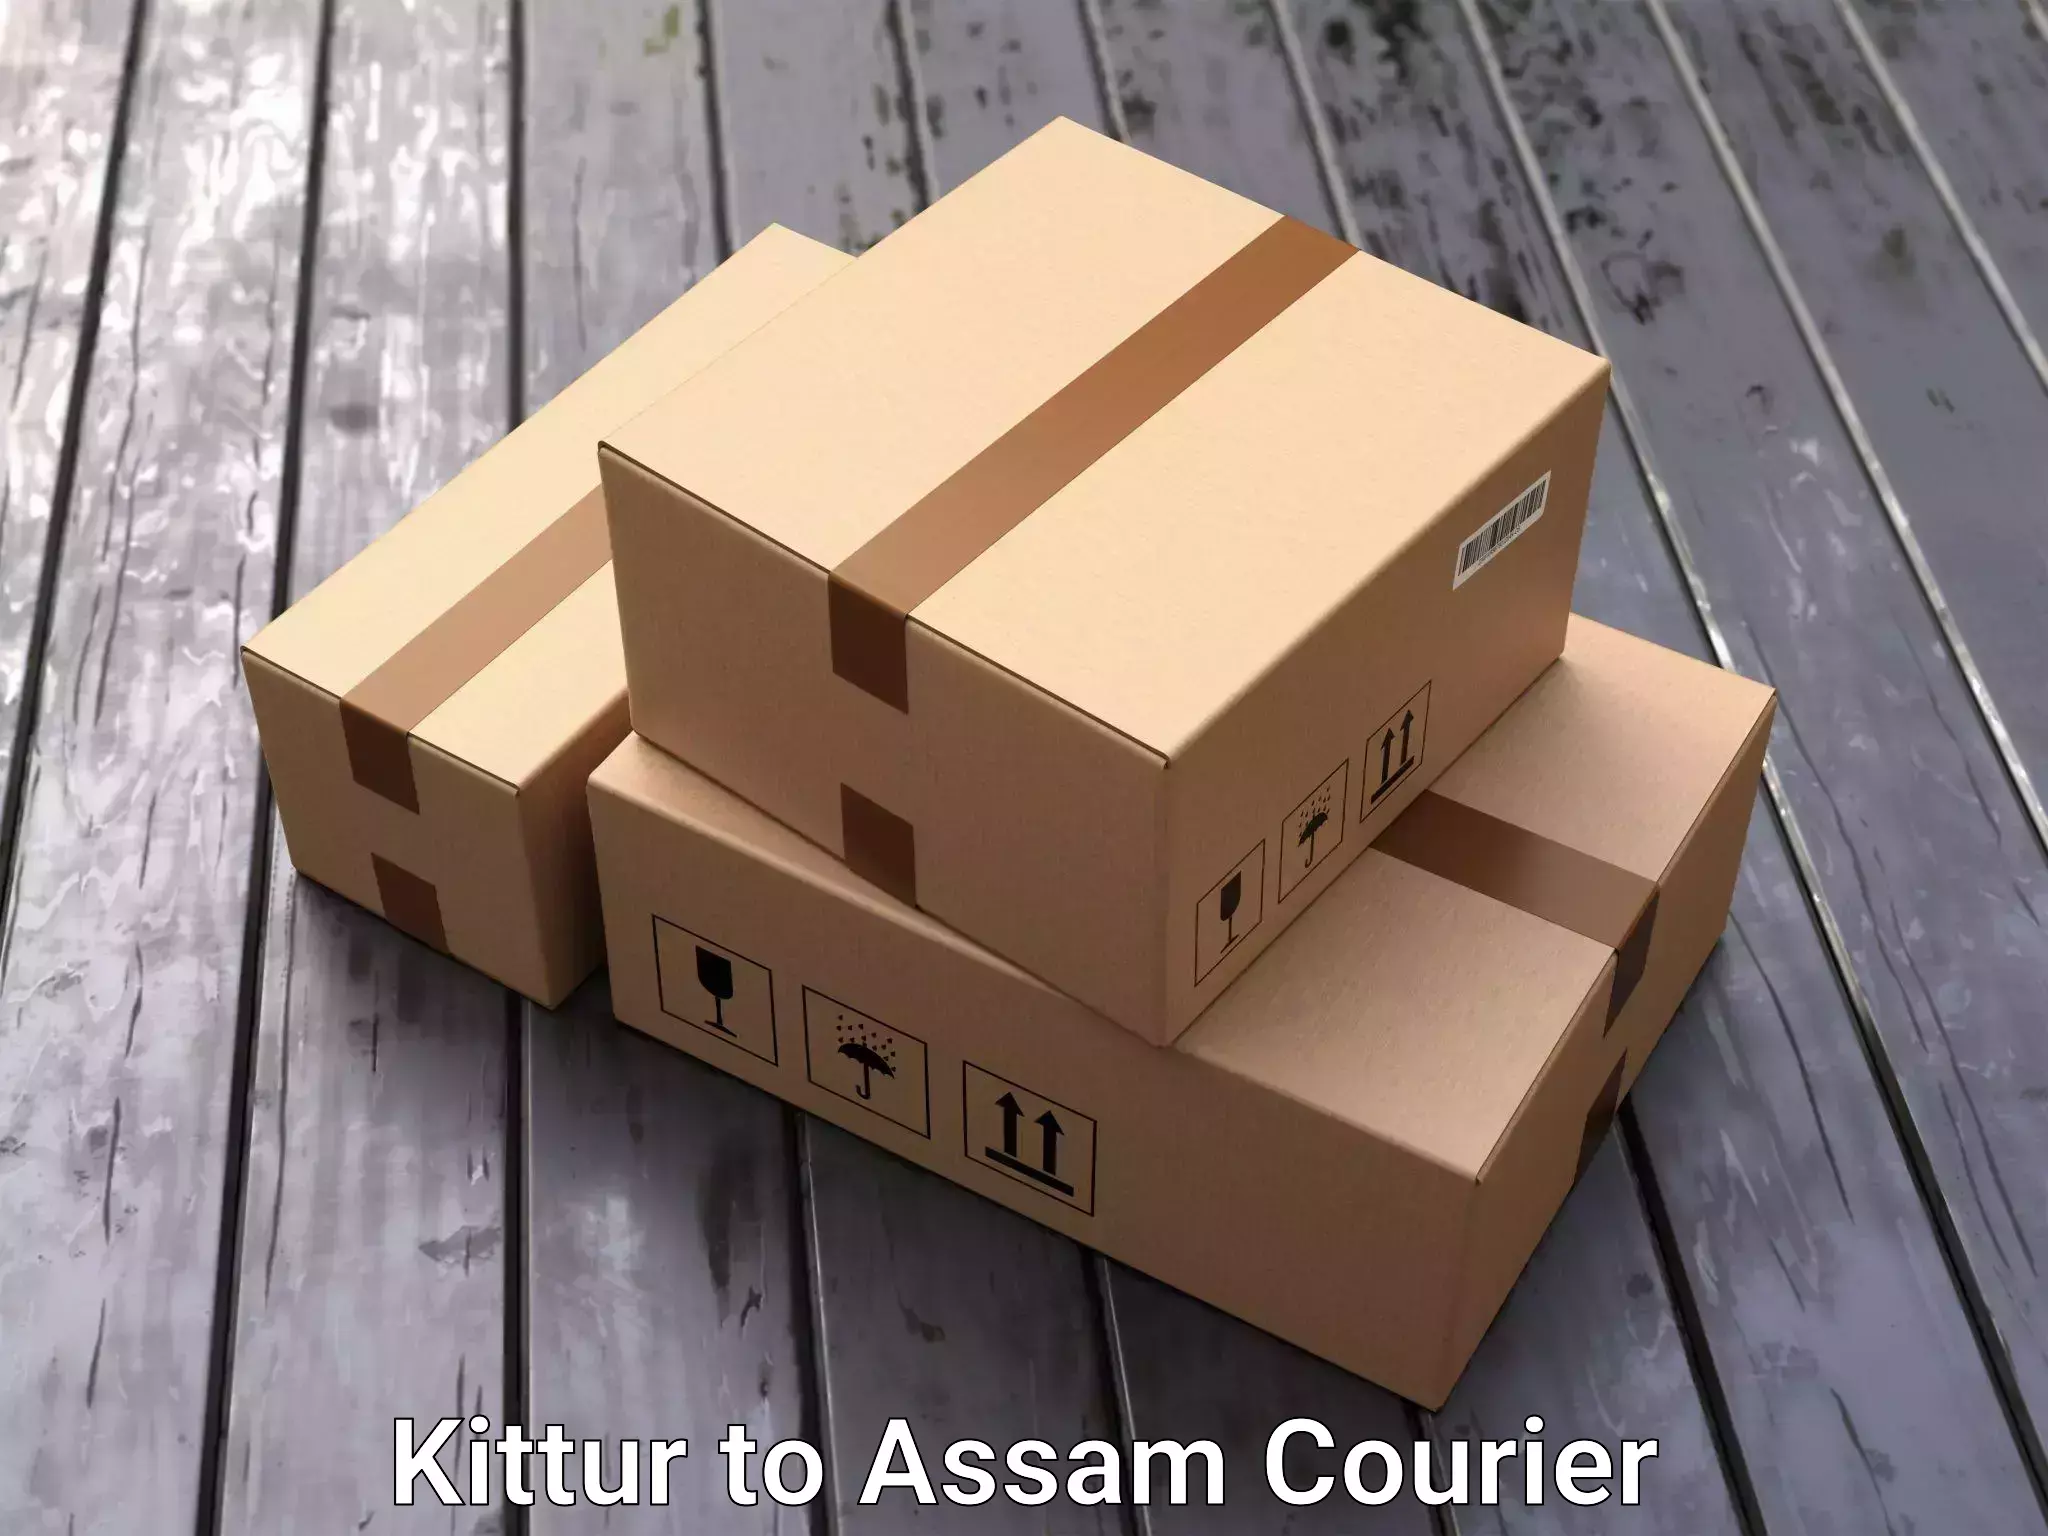 Professional moving assistance Kittur to Assam